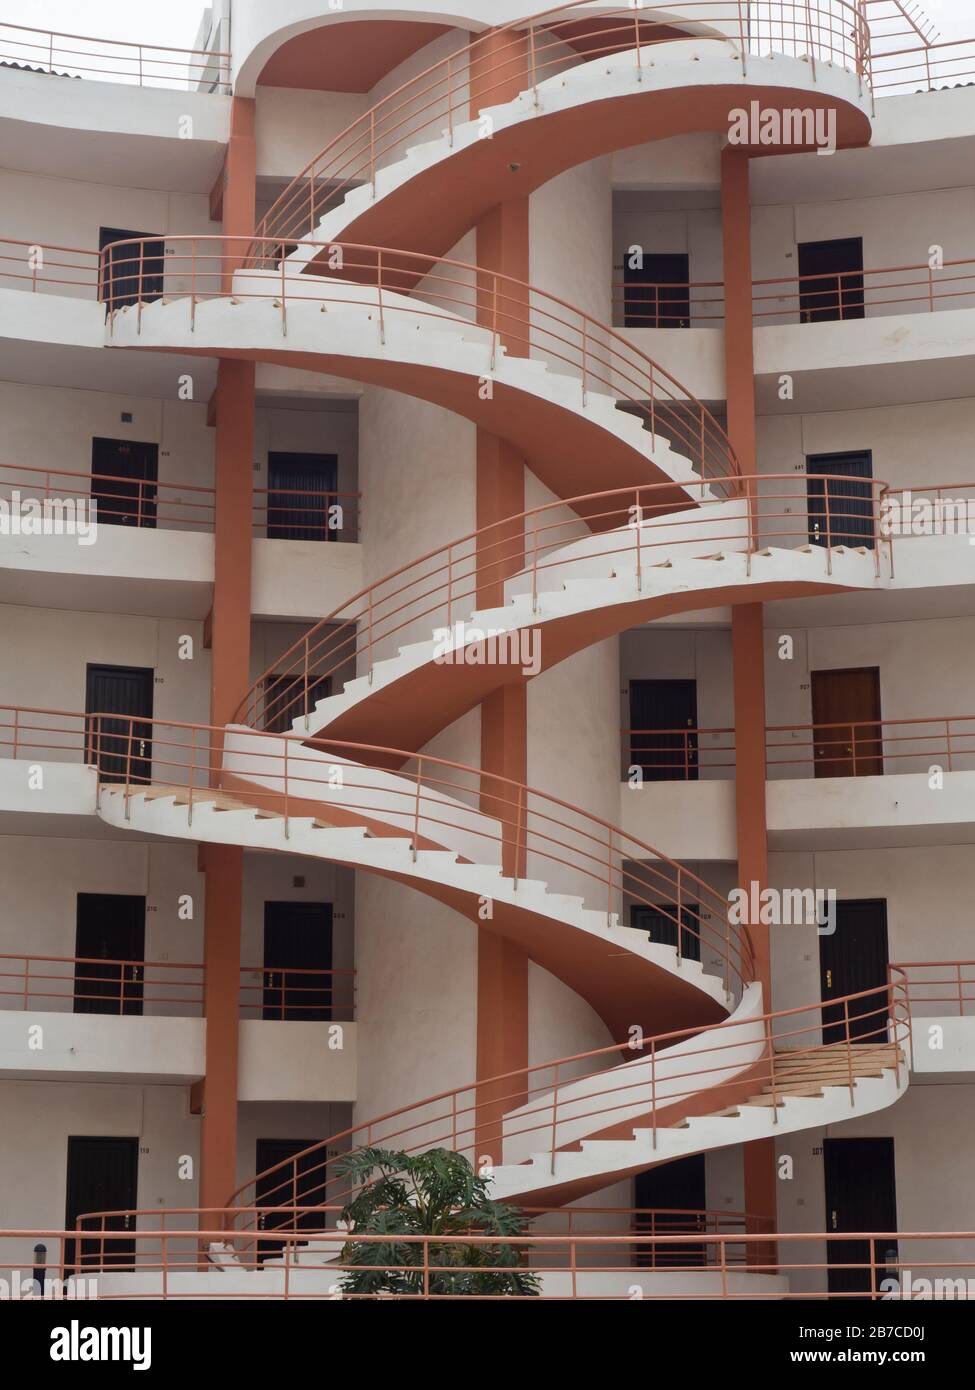 Architecture in red and white, an outdoors spiral staircase on a building in the tourist resort of Los Christians, Tenerife, Canary Islands Spain Stock Photo